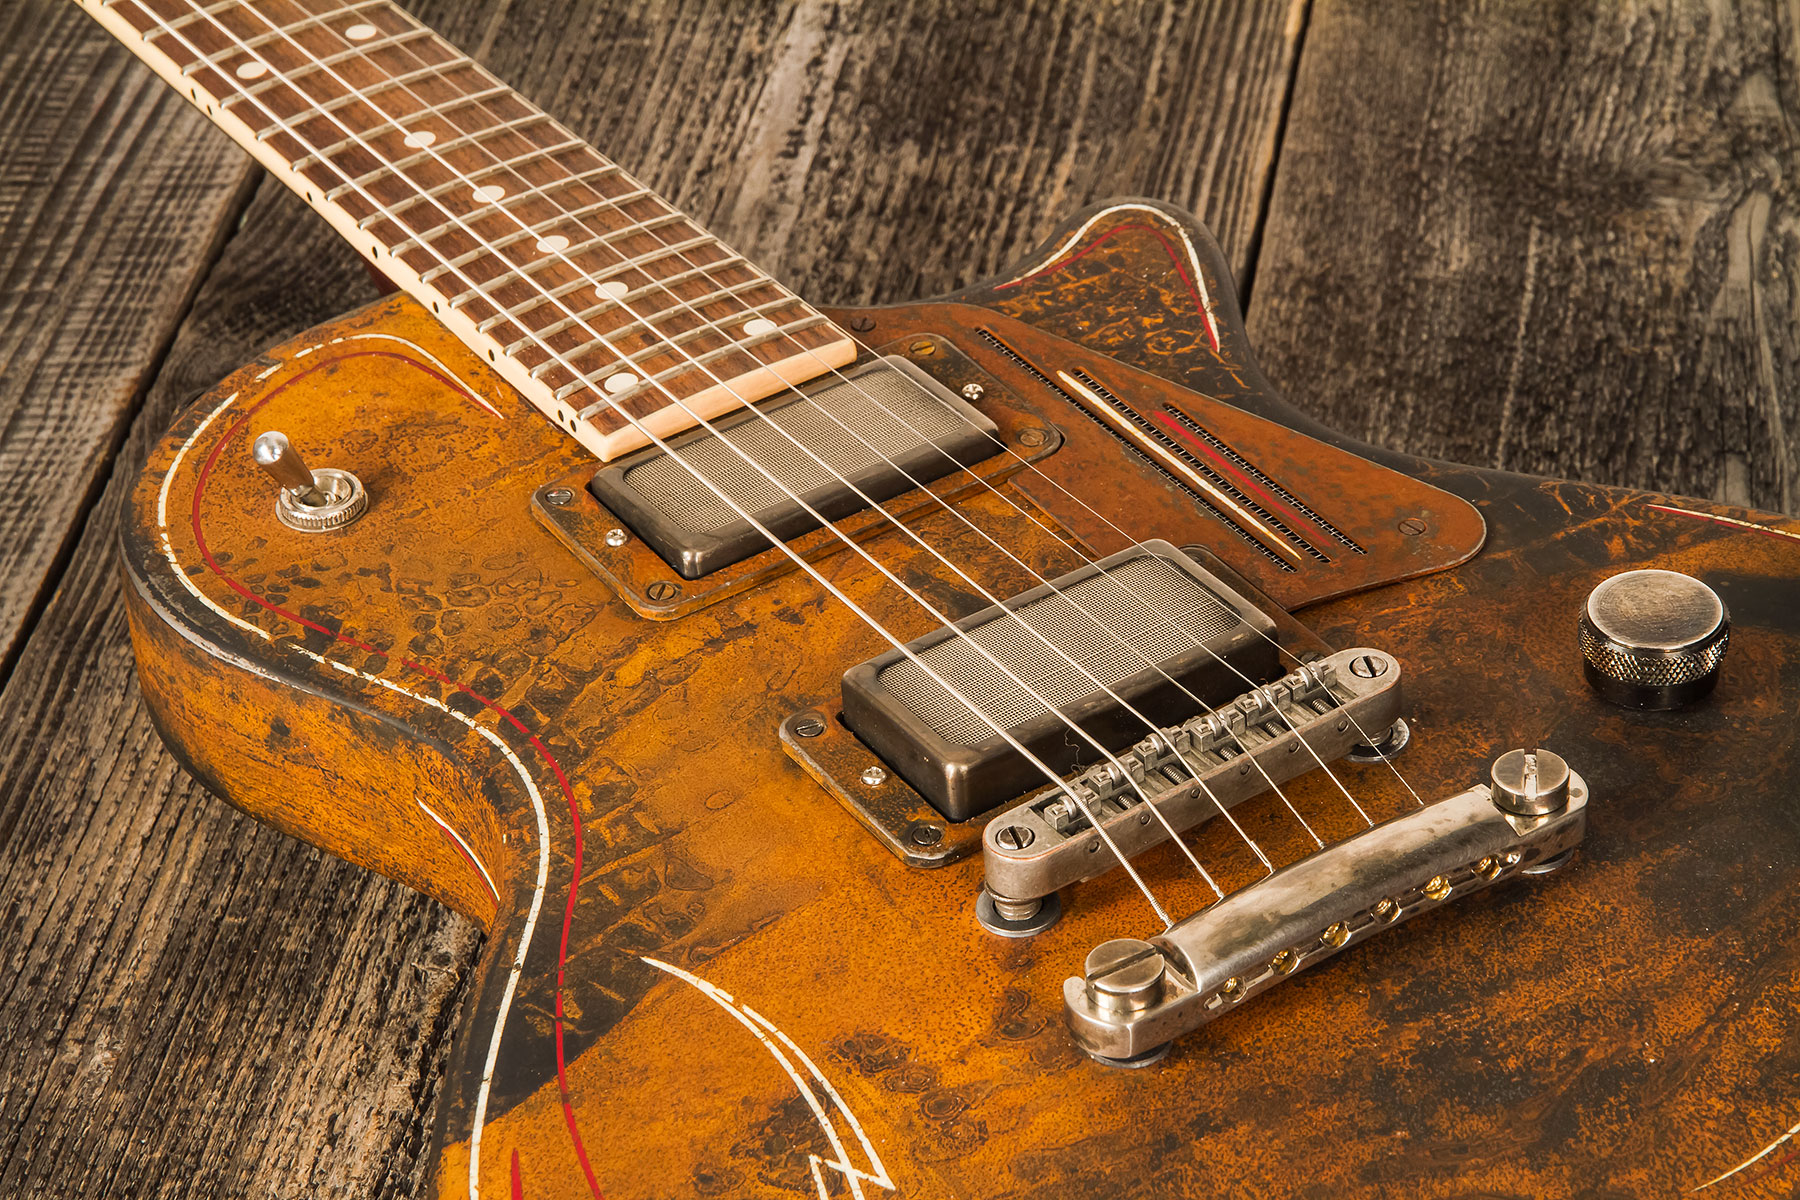 James Trussart Steeldeville Perf.back 2h Ht Rw #21171 - Rust O Matic Pinstriped - Single cut electric guitar - Variation 3